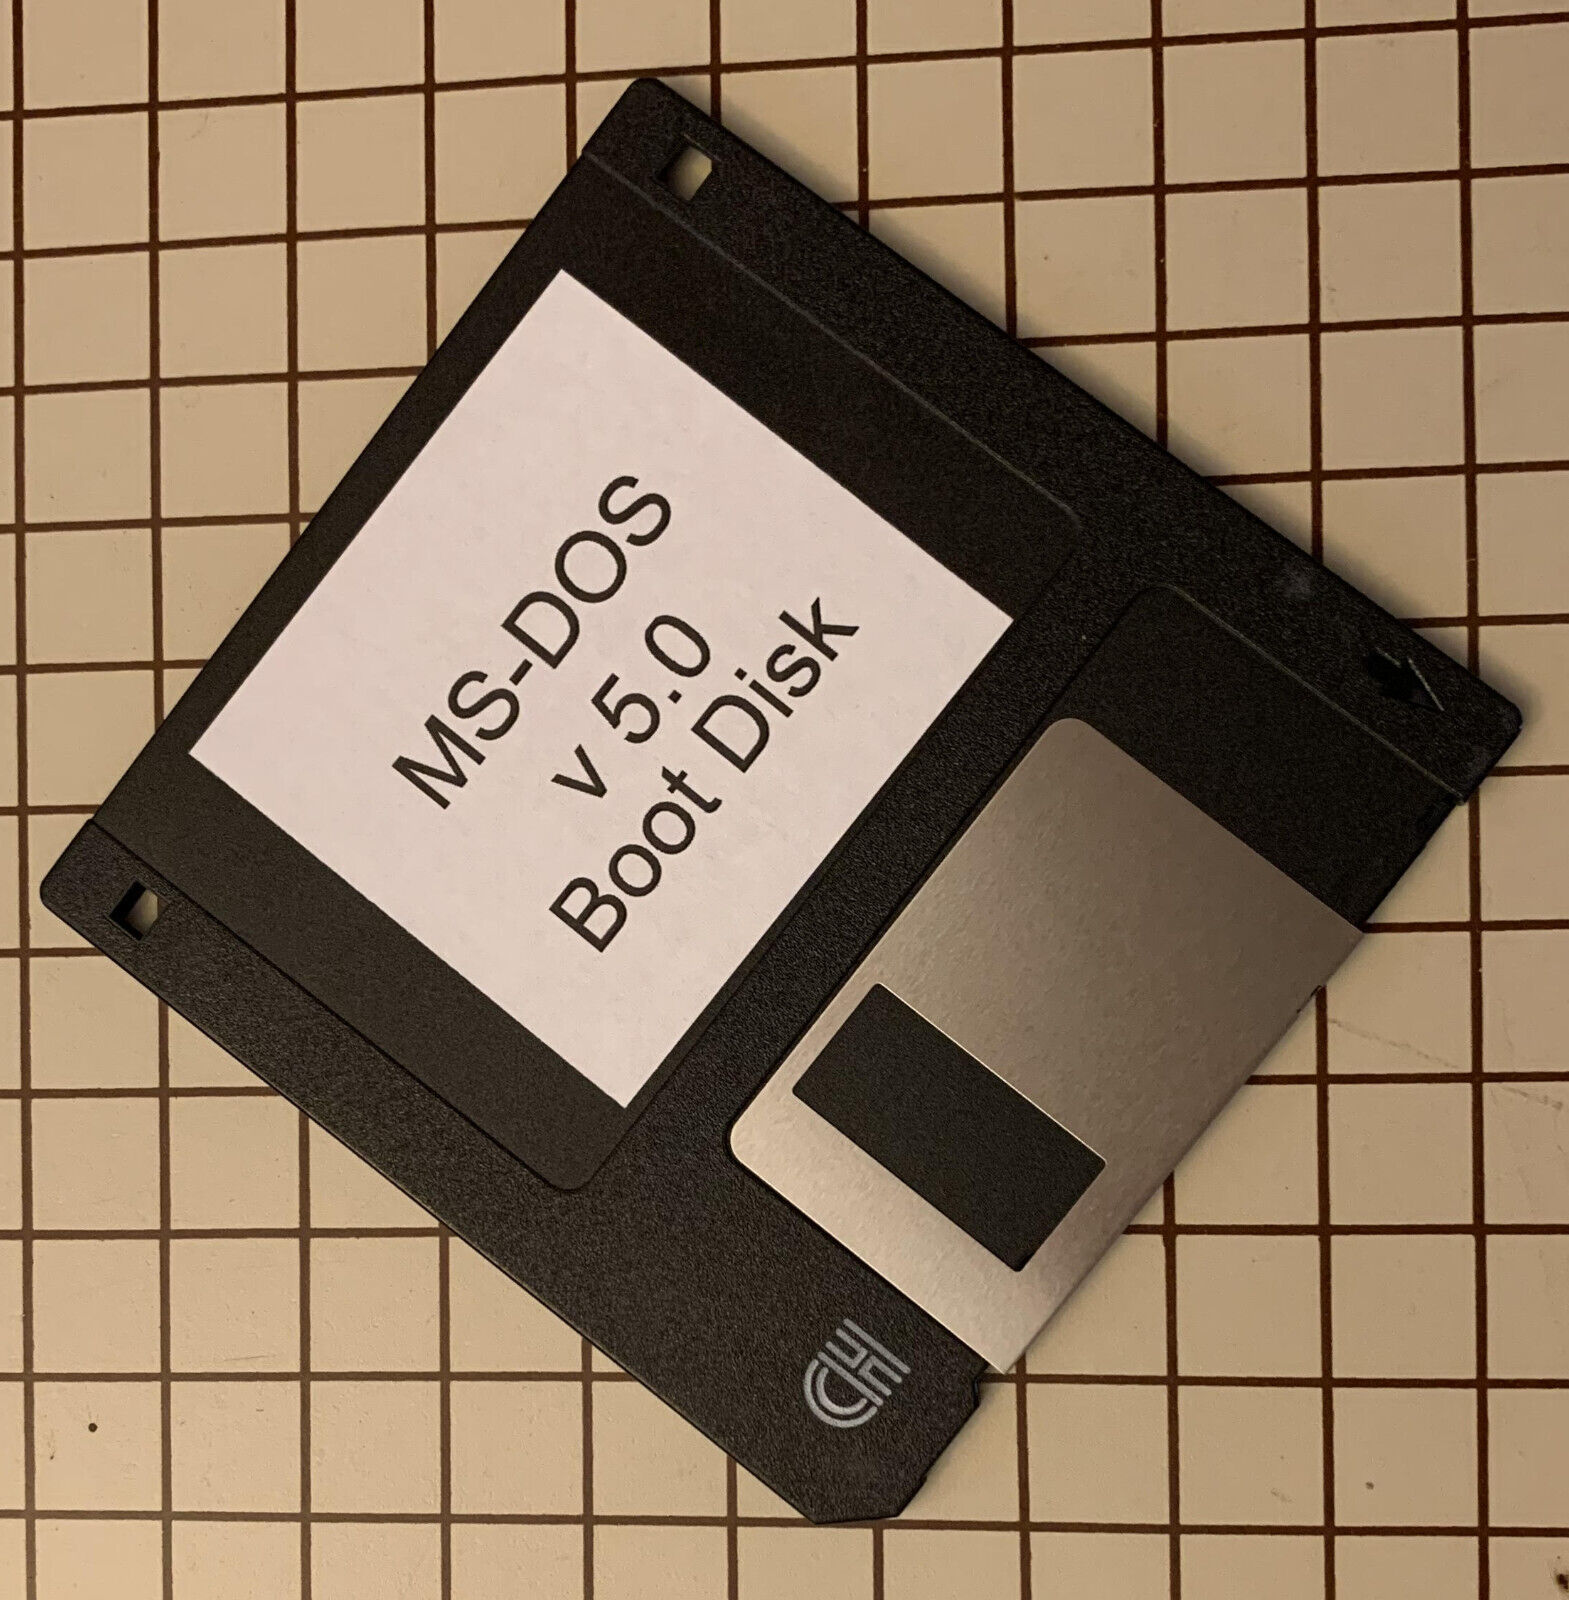 MS-DOS v 5.0 Boot Disk DOS Reproduction Disk